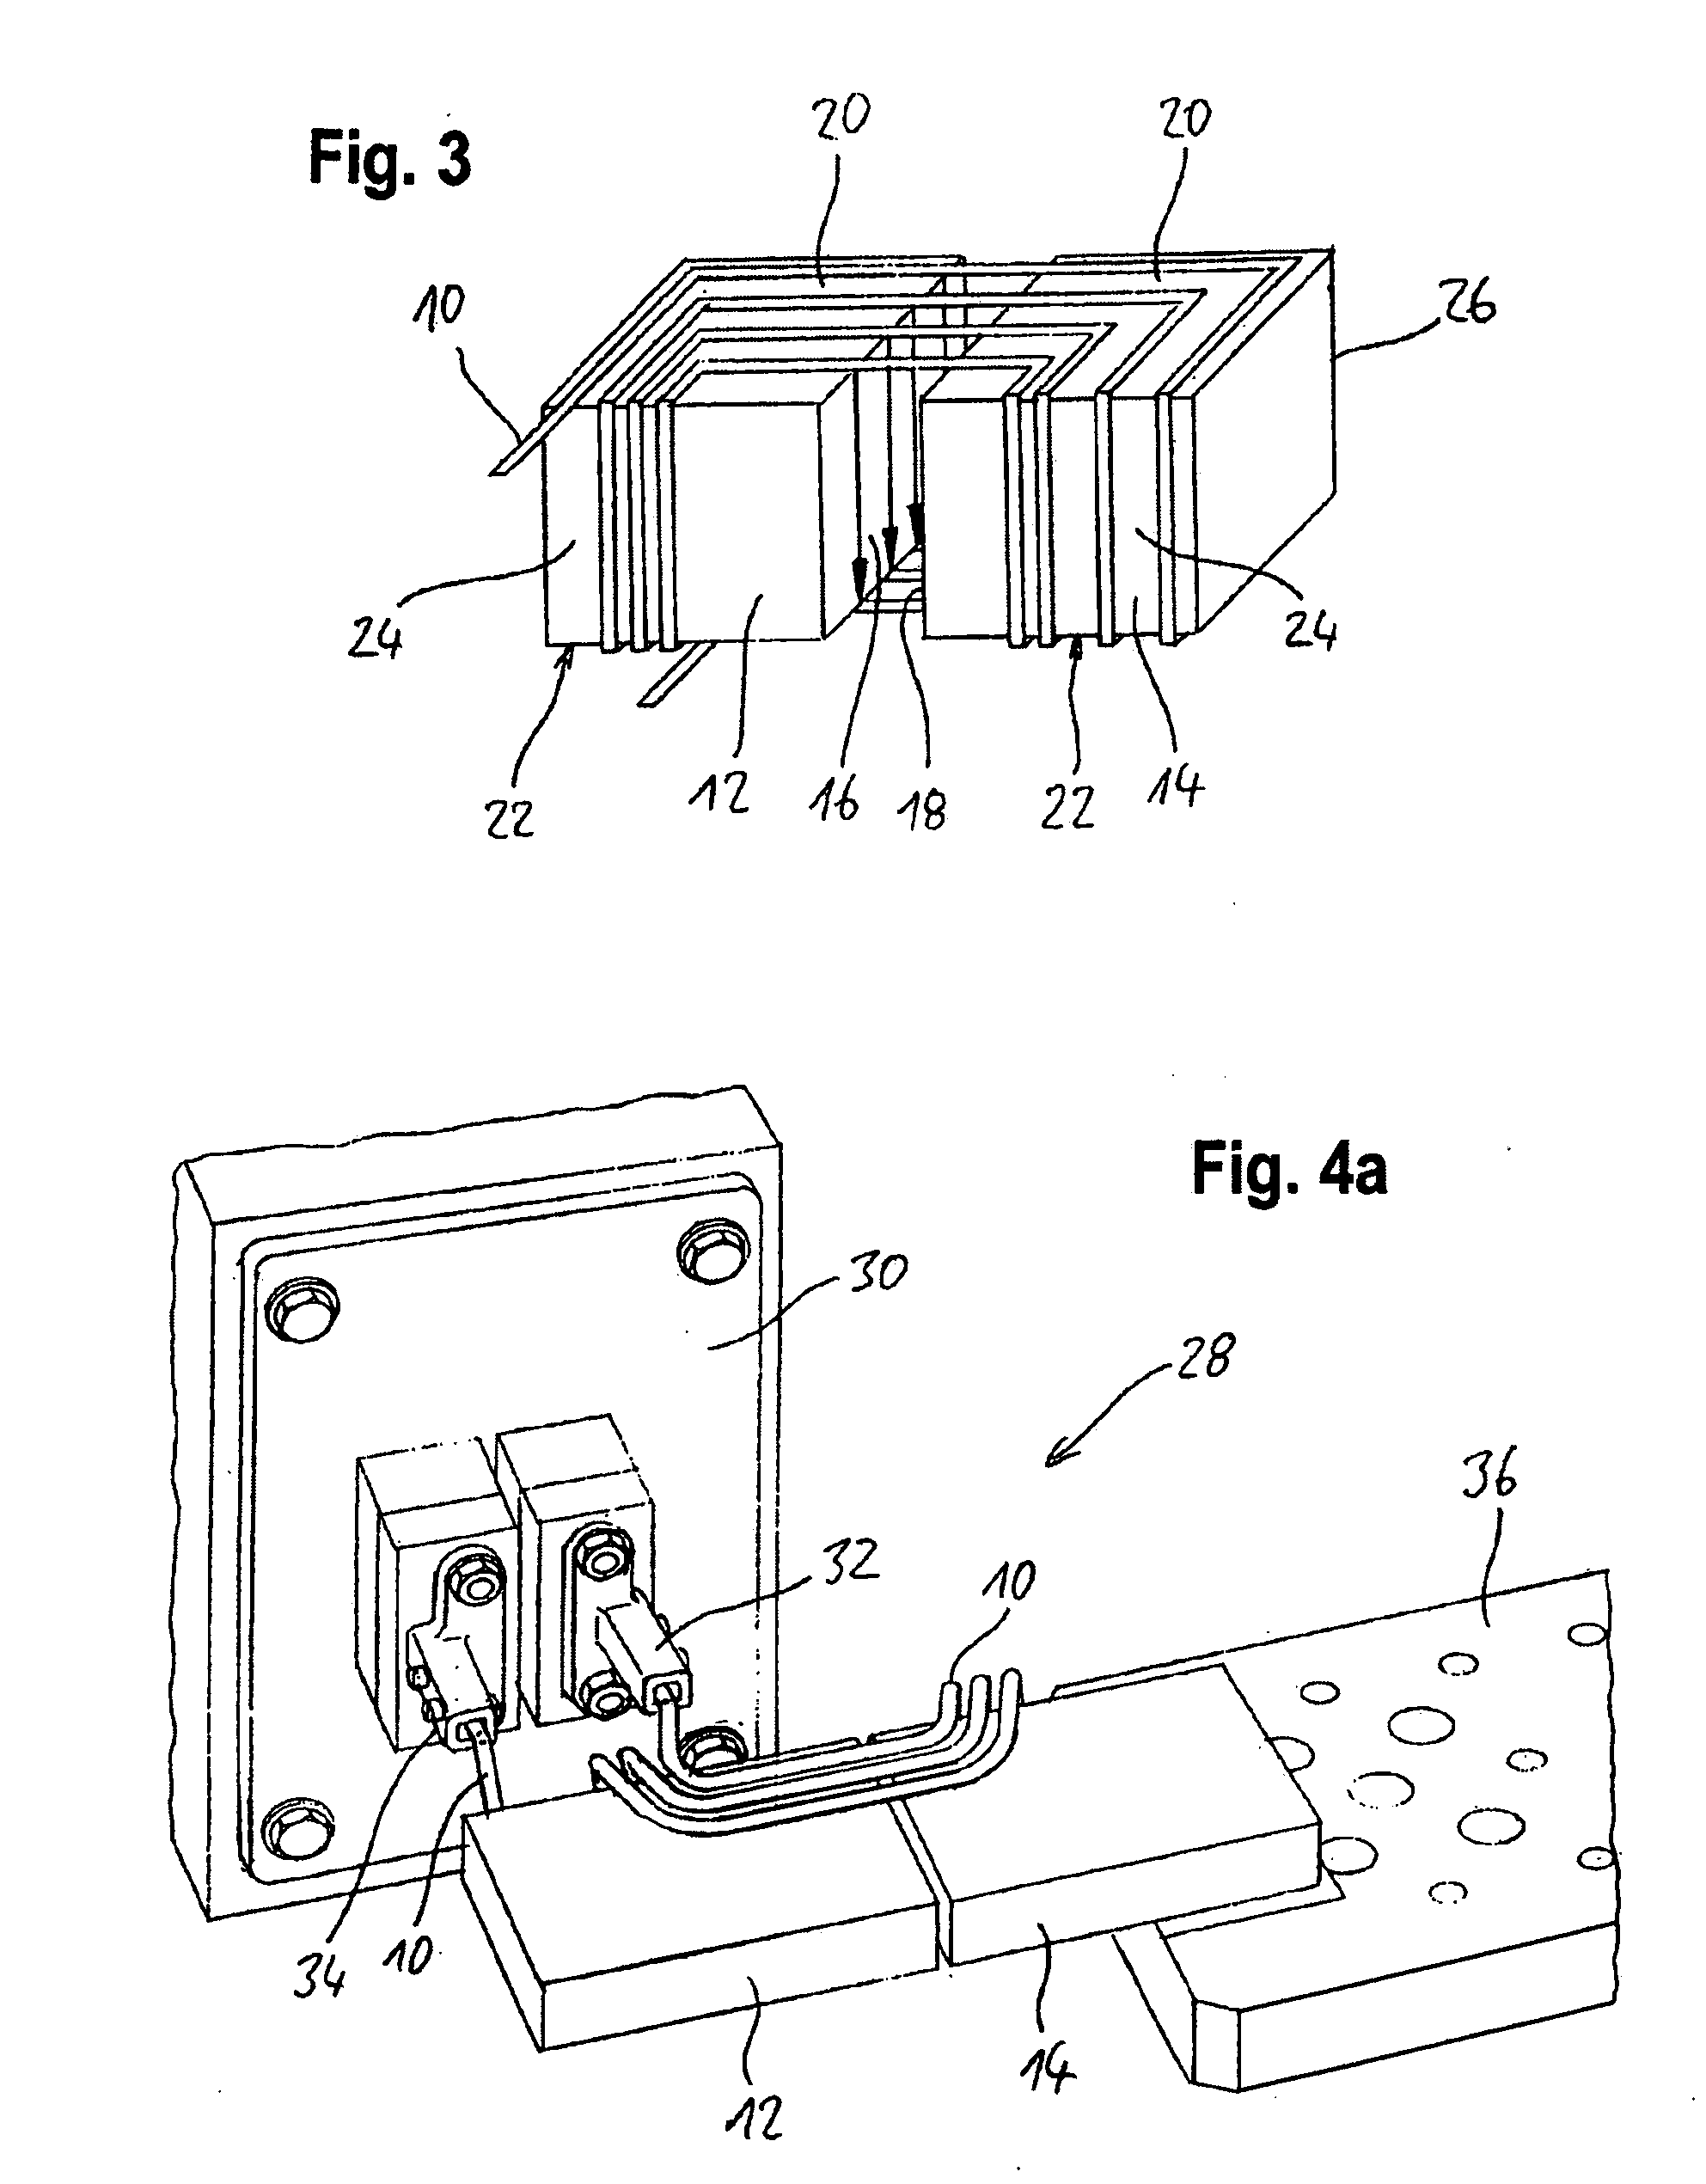 Induction coil, method and device for inductive heating of metallic components